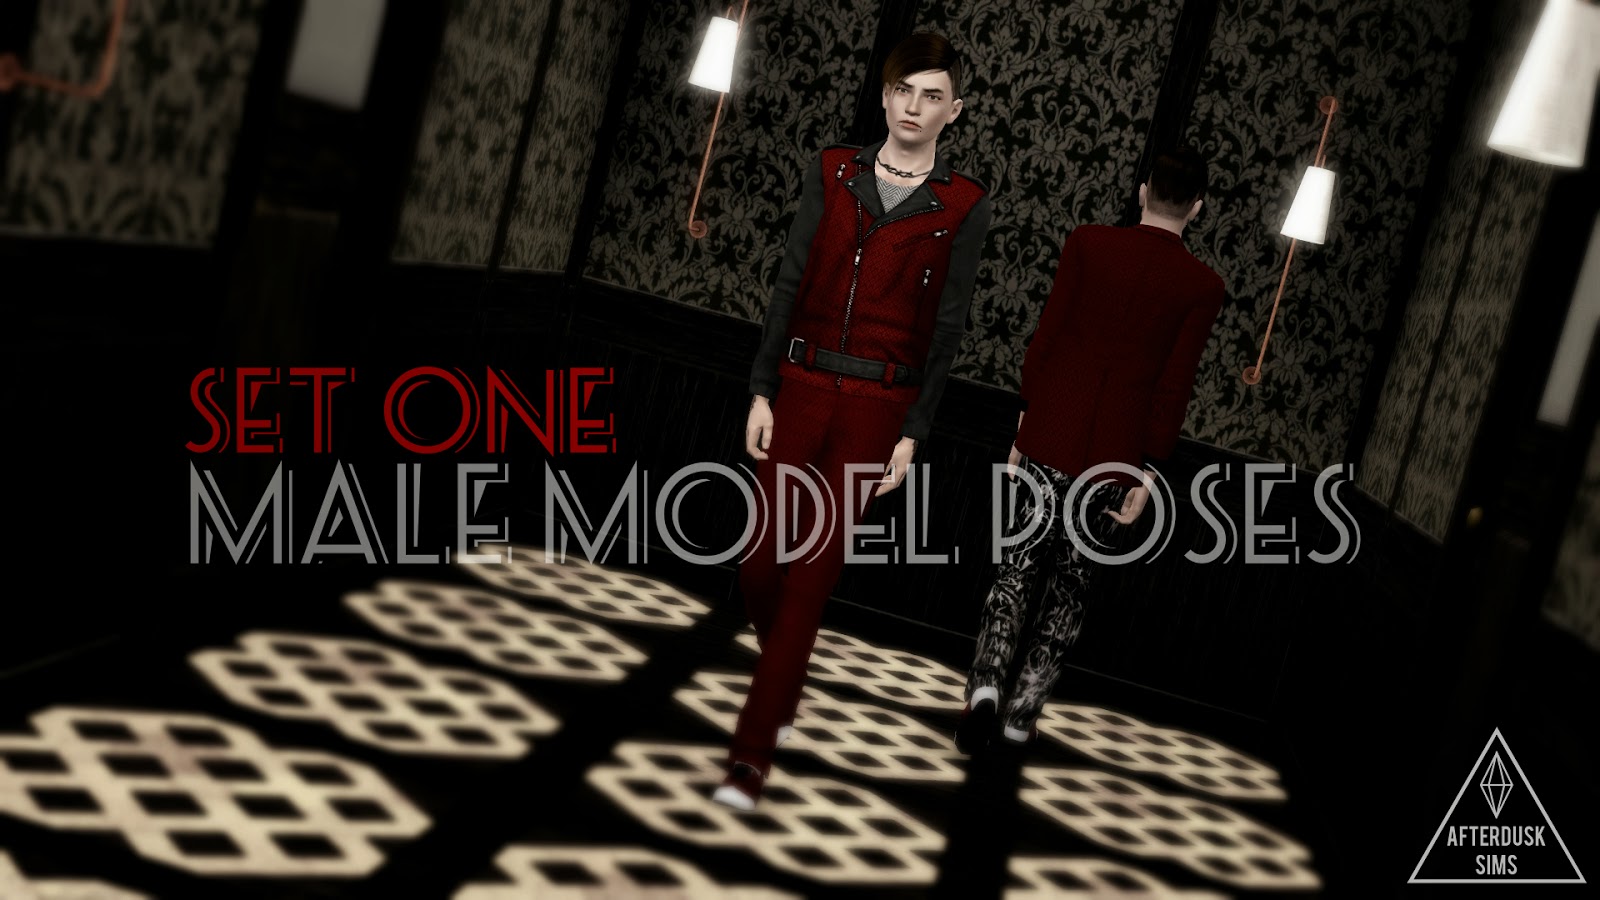 Male Model Pose Set One - The Sims 3 Catalog